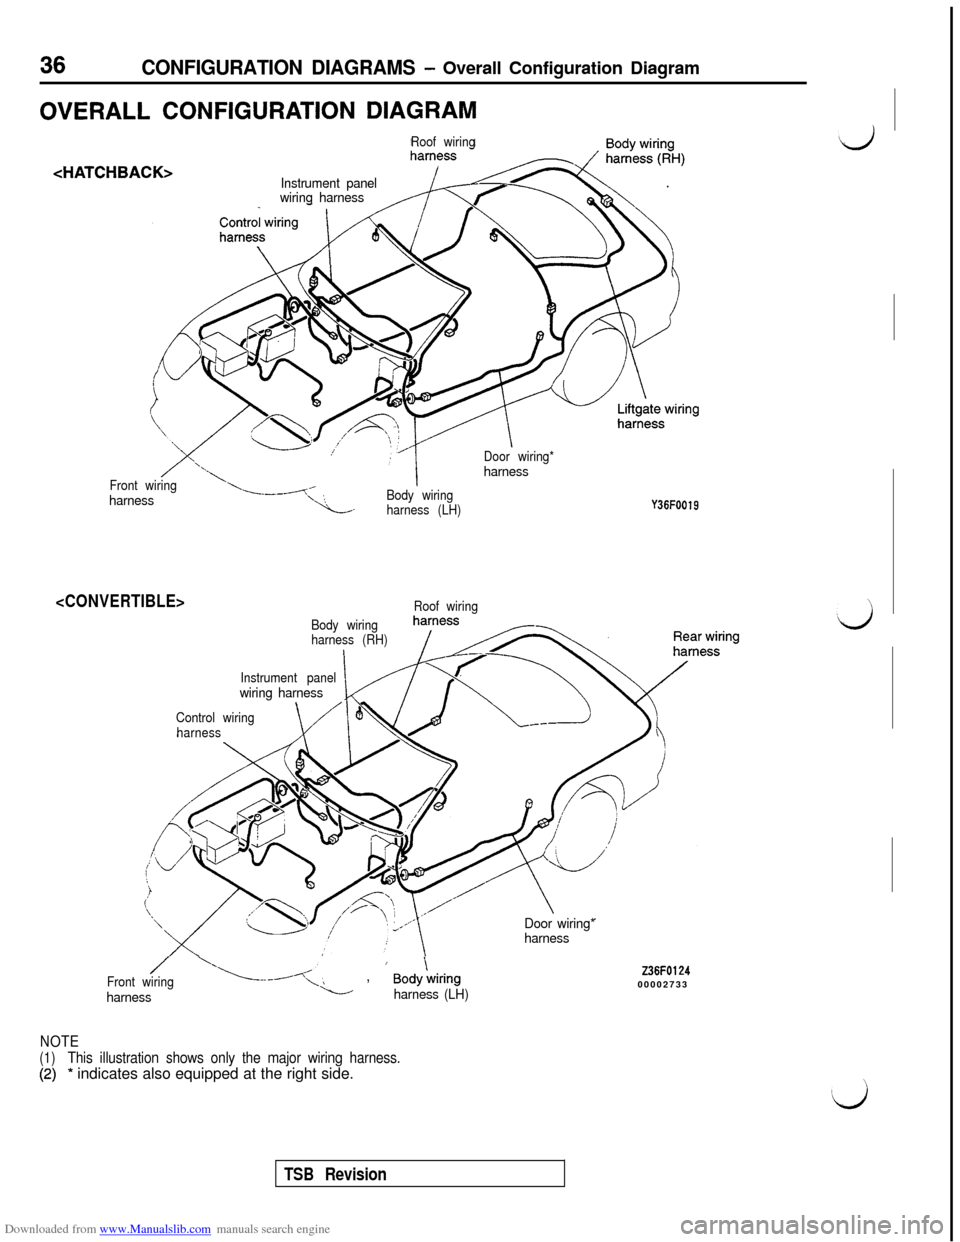 MITSUBISHI 3000GT 1993 2.G Workshop Manual Downloaded from www.Manualslib.com manuals search engine 36CONFIGURATION DIAGRAMS - Overall Configuration Diagram
OVERALL CONFIGURATION DIAGRAM
<HAT1
Roof wiring
CHBACK>Instrument panel
wiring harness